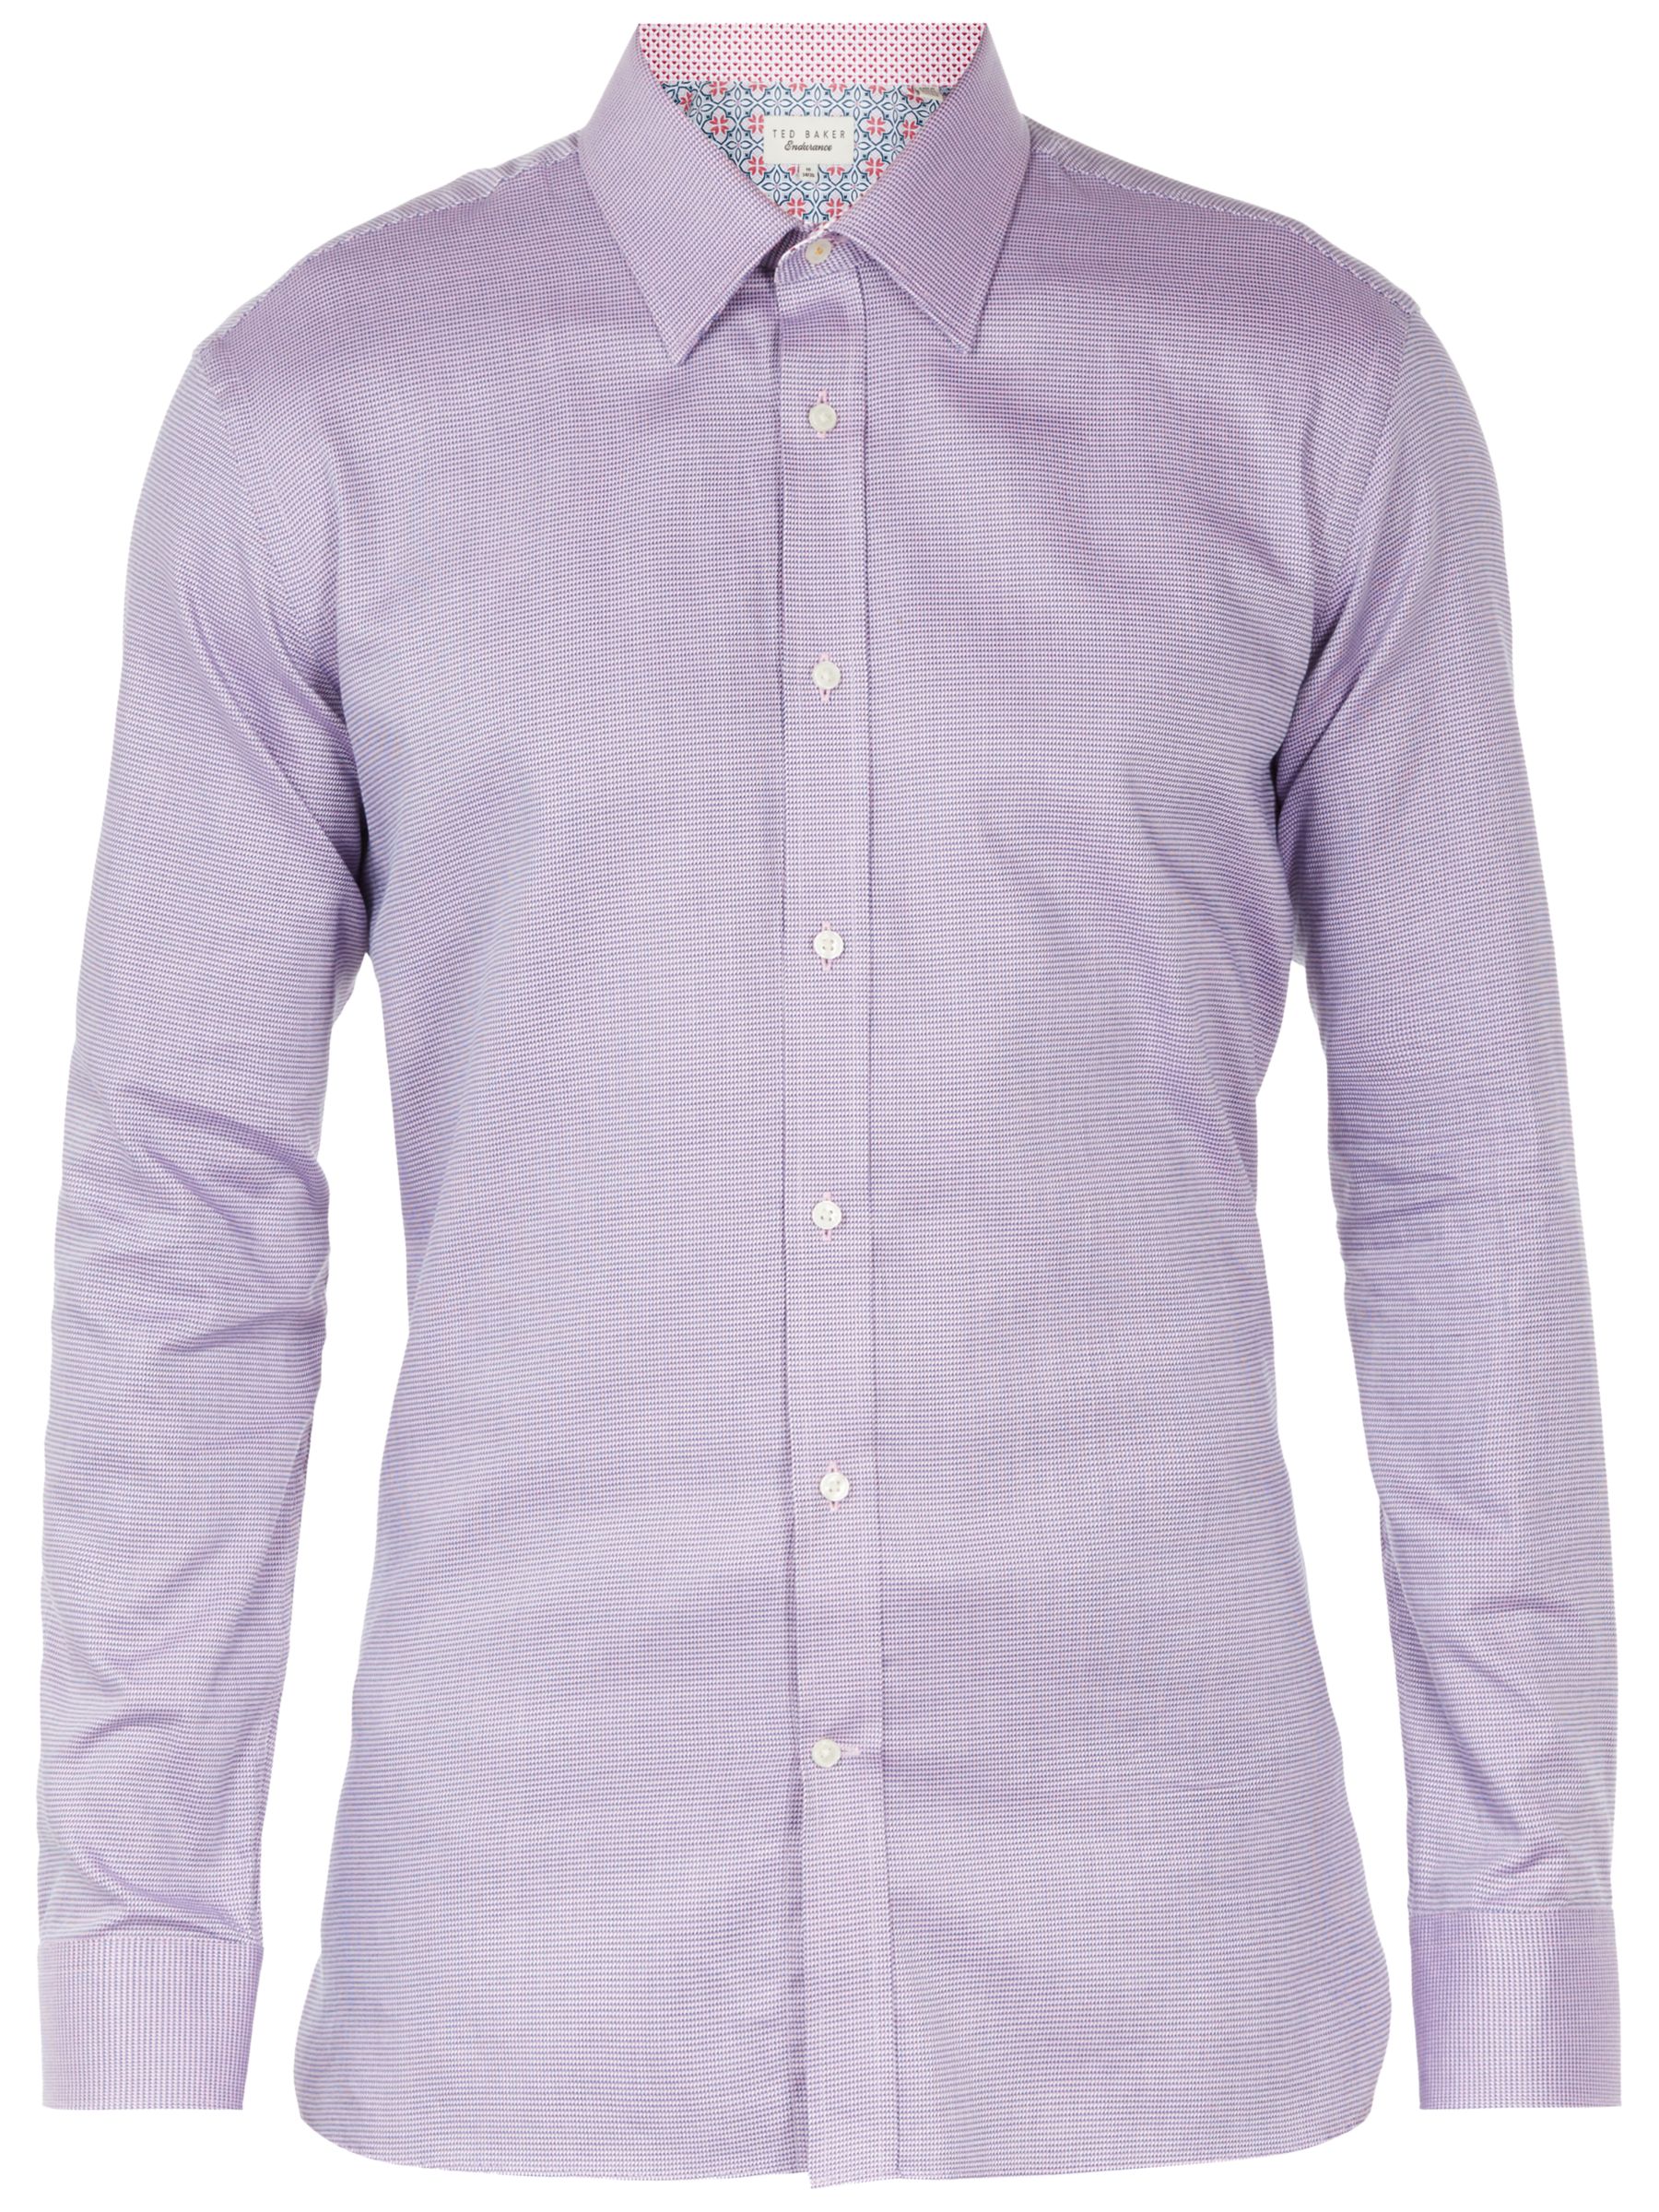 Ted Baker Shell Houndstooth Shirt, Pink